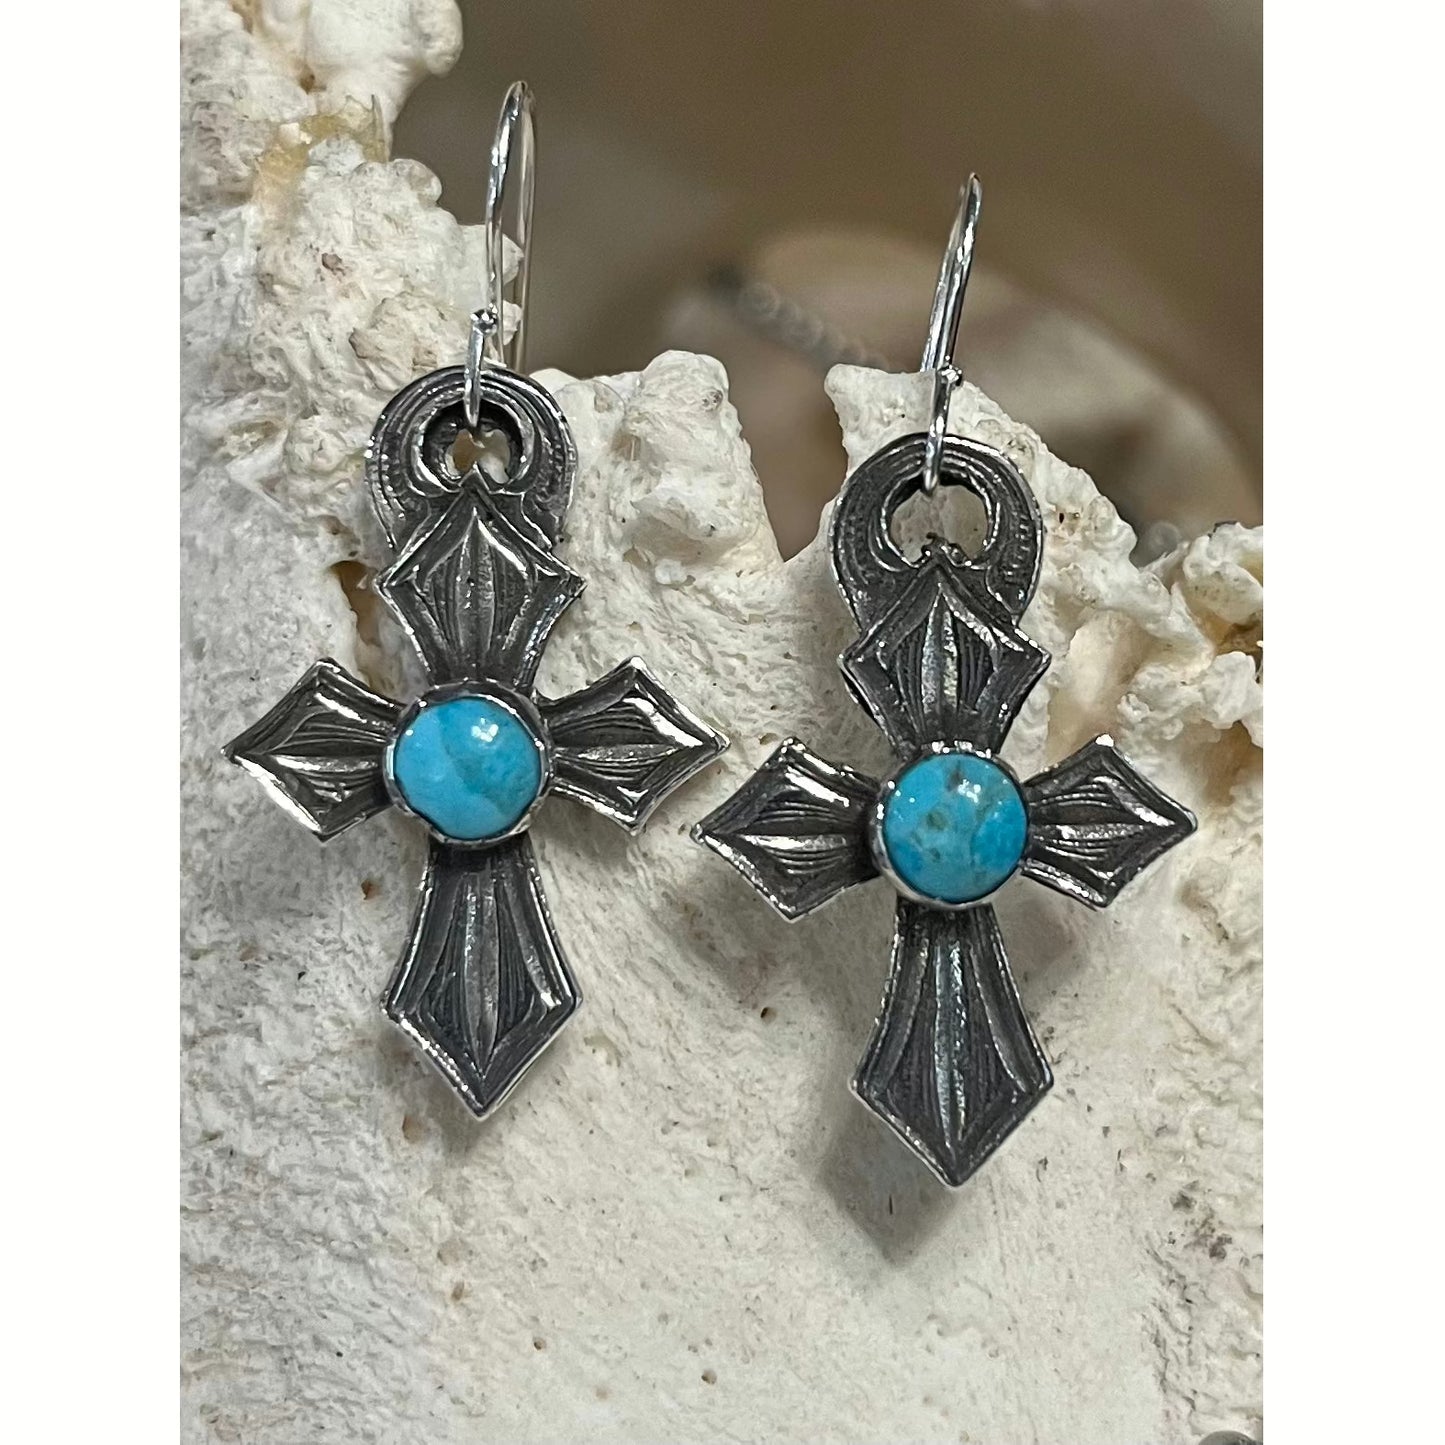 The "Lil Sprit" handmade Cross Earrings are small sterling silver cross dangle earrings that feature a round bezel set Genuine Kingman Turquoise Stone from the Kingman Mines in Kingman, AZ. Measures at 3/4" X 1 1/4".  